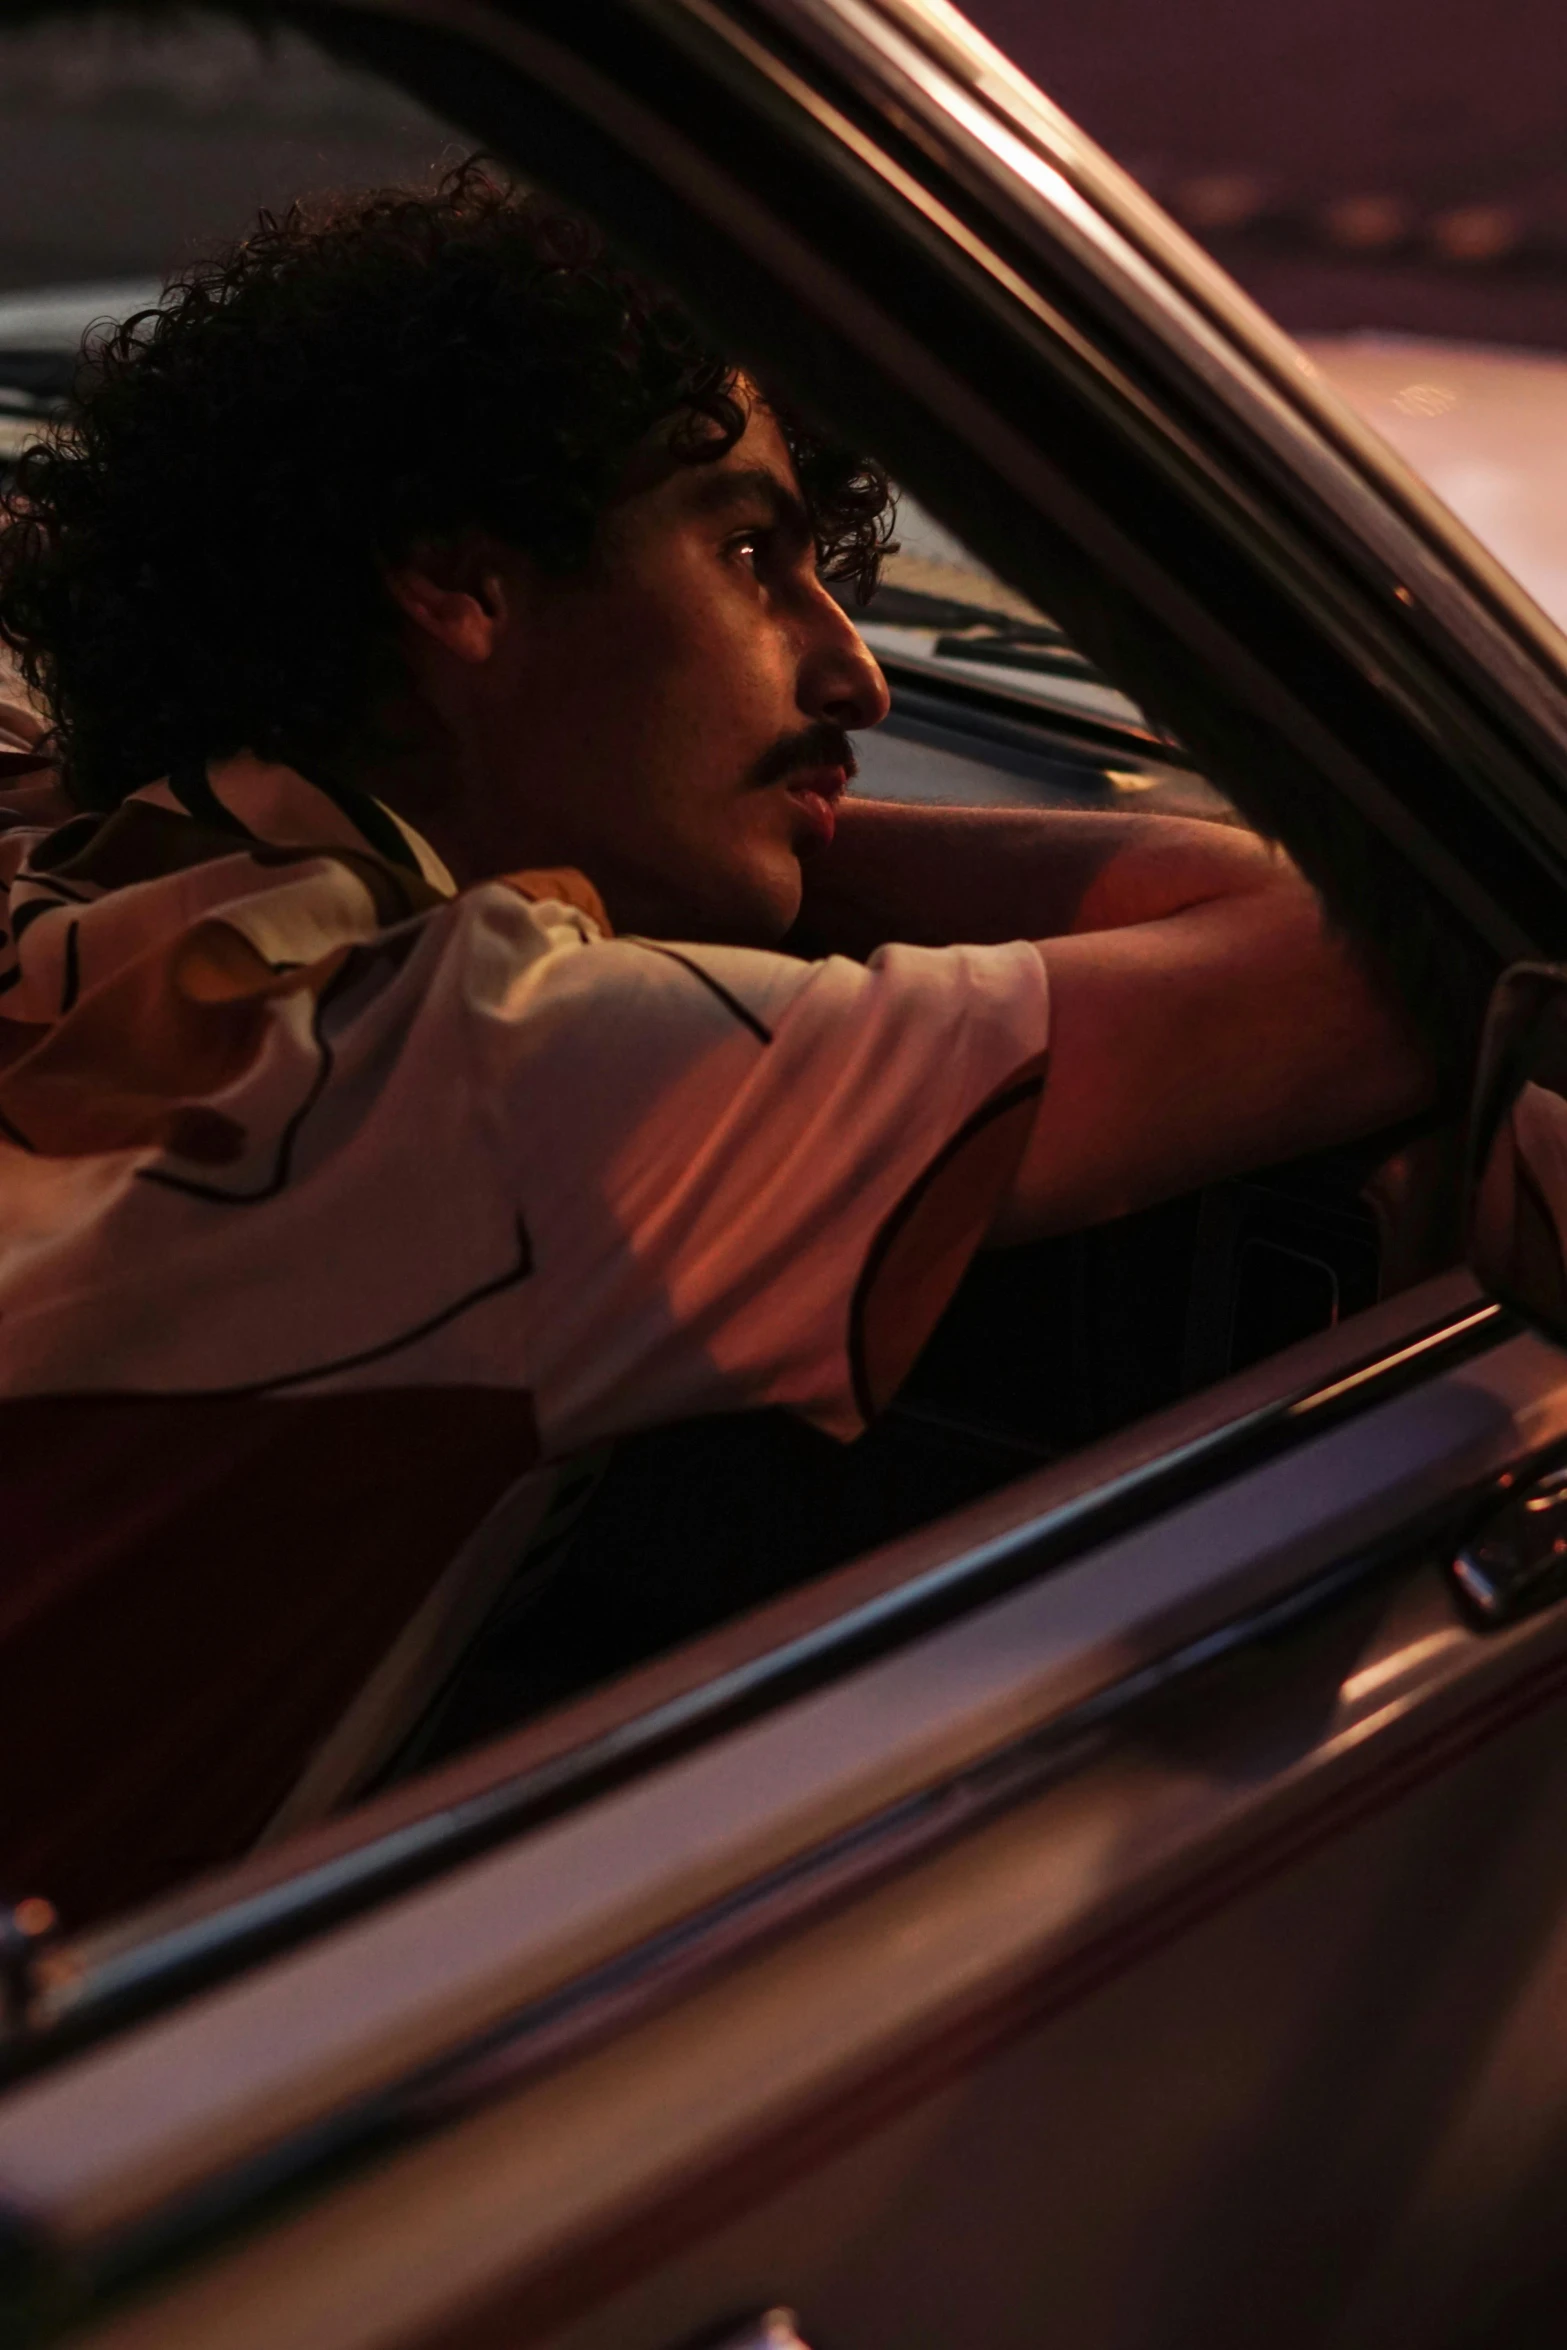 a woman sitting in the passenger seat of a car, an album cover, by Alexis Grimou, imaan hammam, raden saleh, handsome man, dynamic movie still